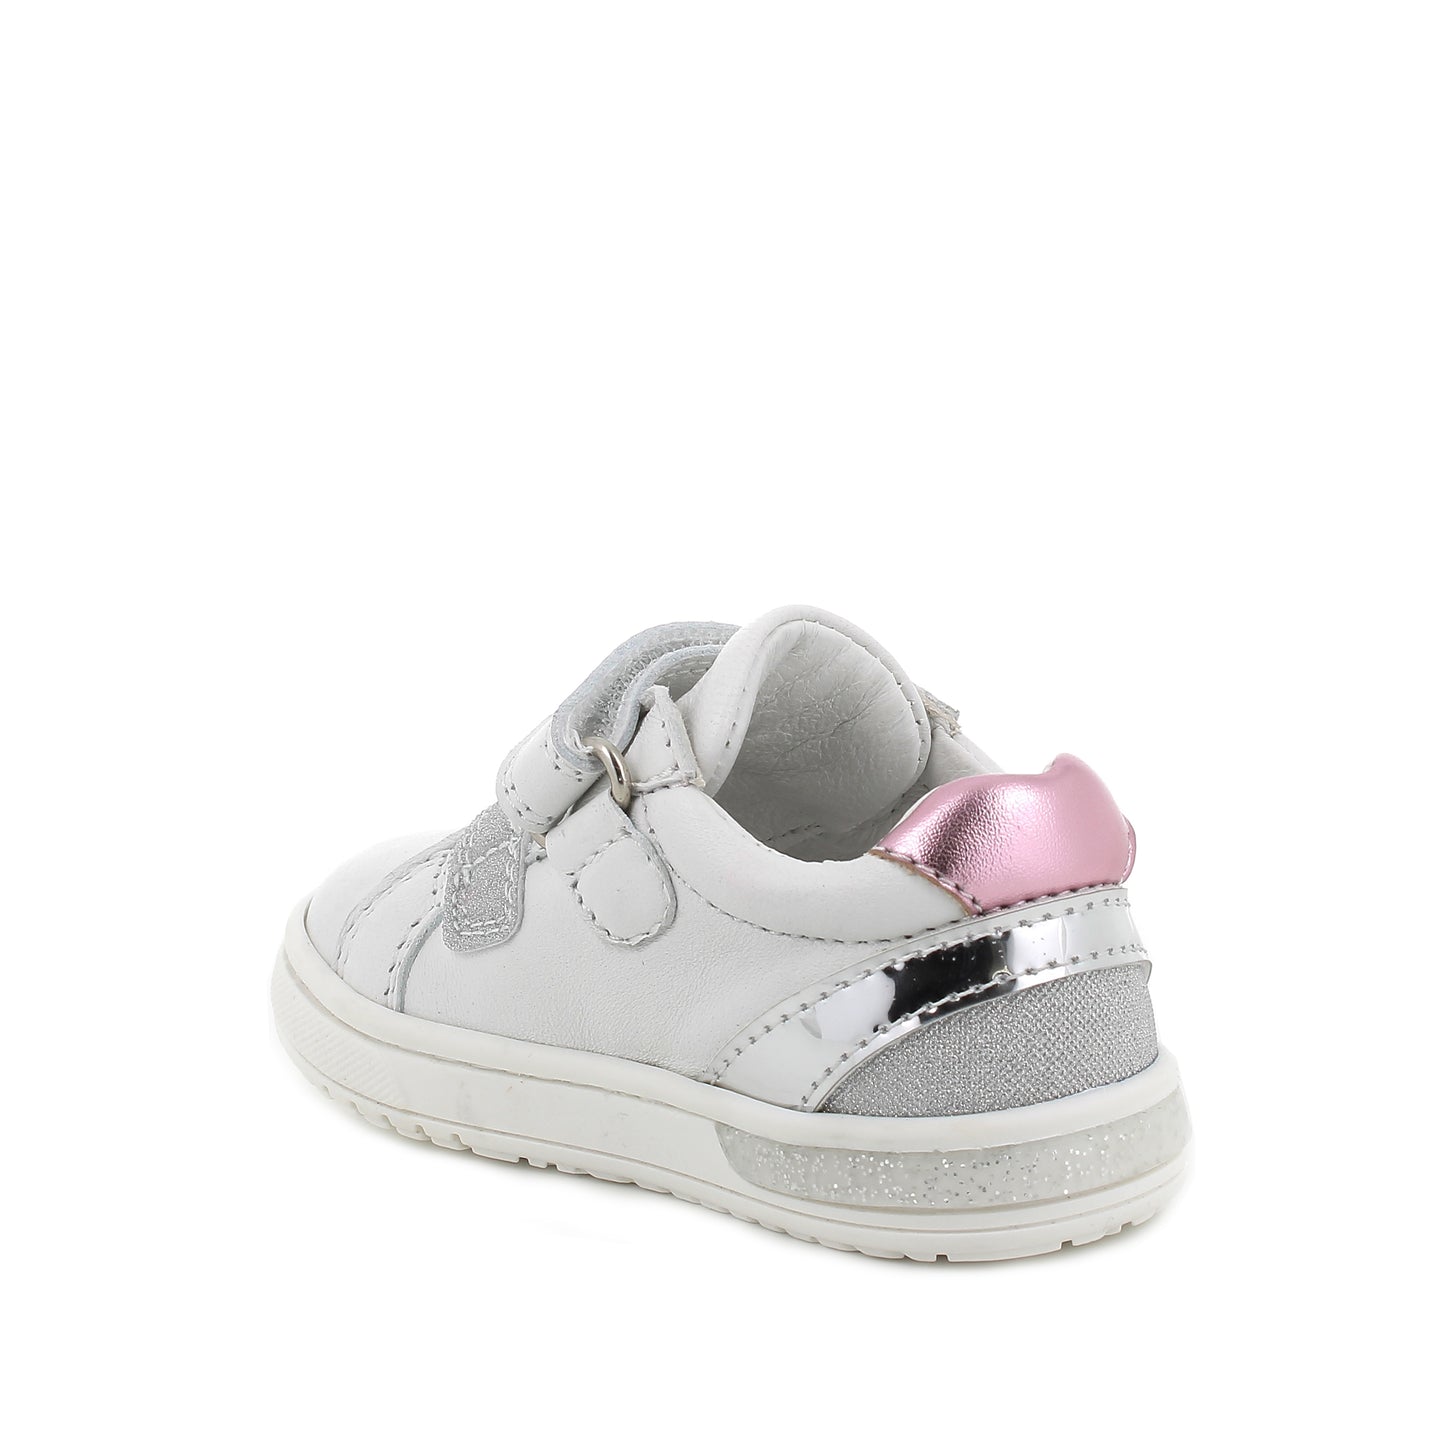 A girls casual shoe by Primigi, style Baby Dude 5905222, in white, pink and silver leather with double velcro fastening. Angled view of left side.